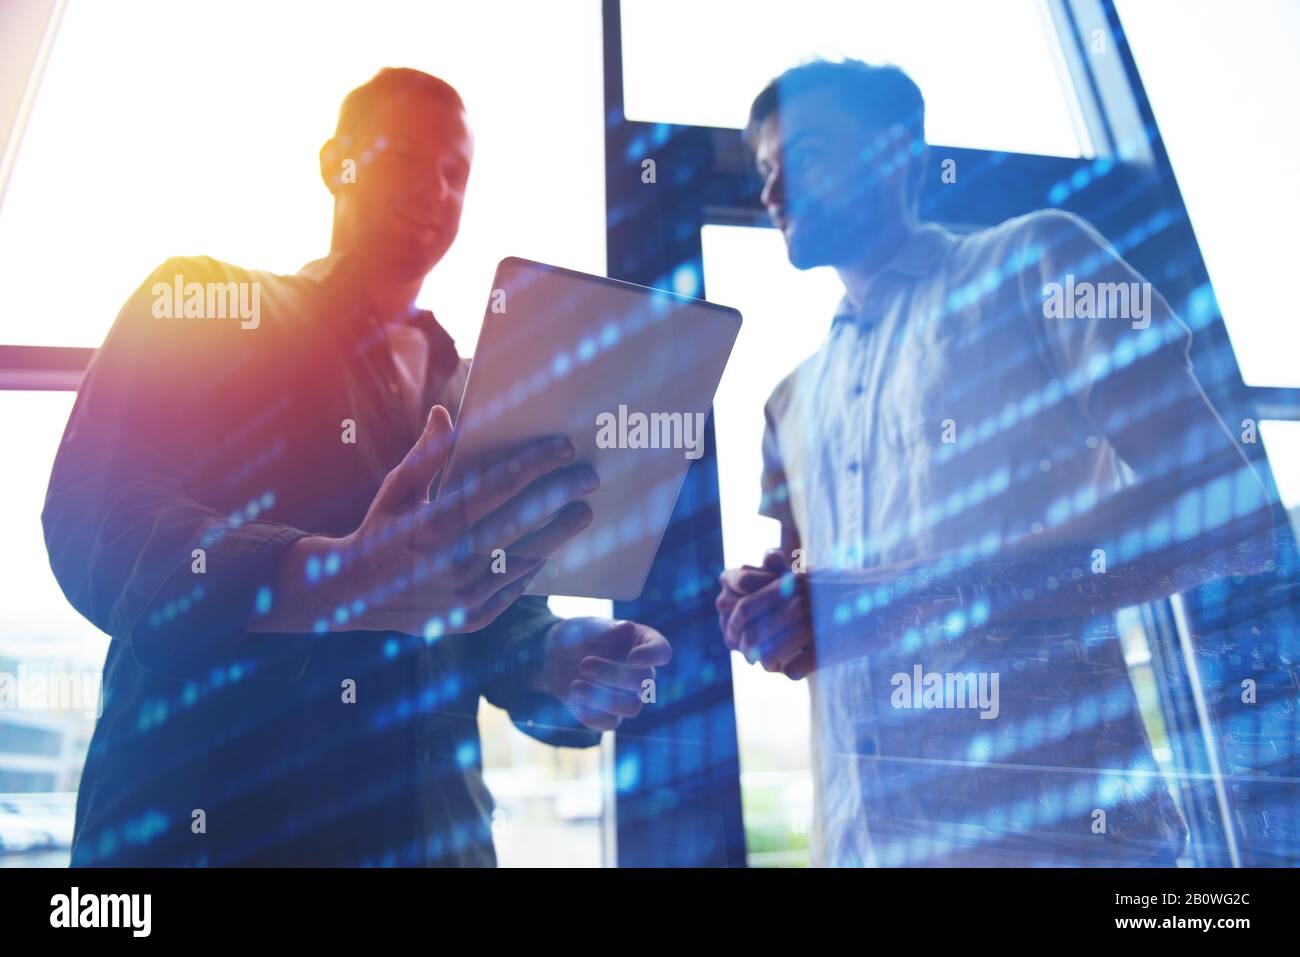 Background concept with business people silhouette looking at the tablet. Double exposure and light effects Stock Photo